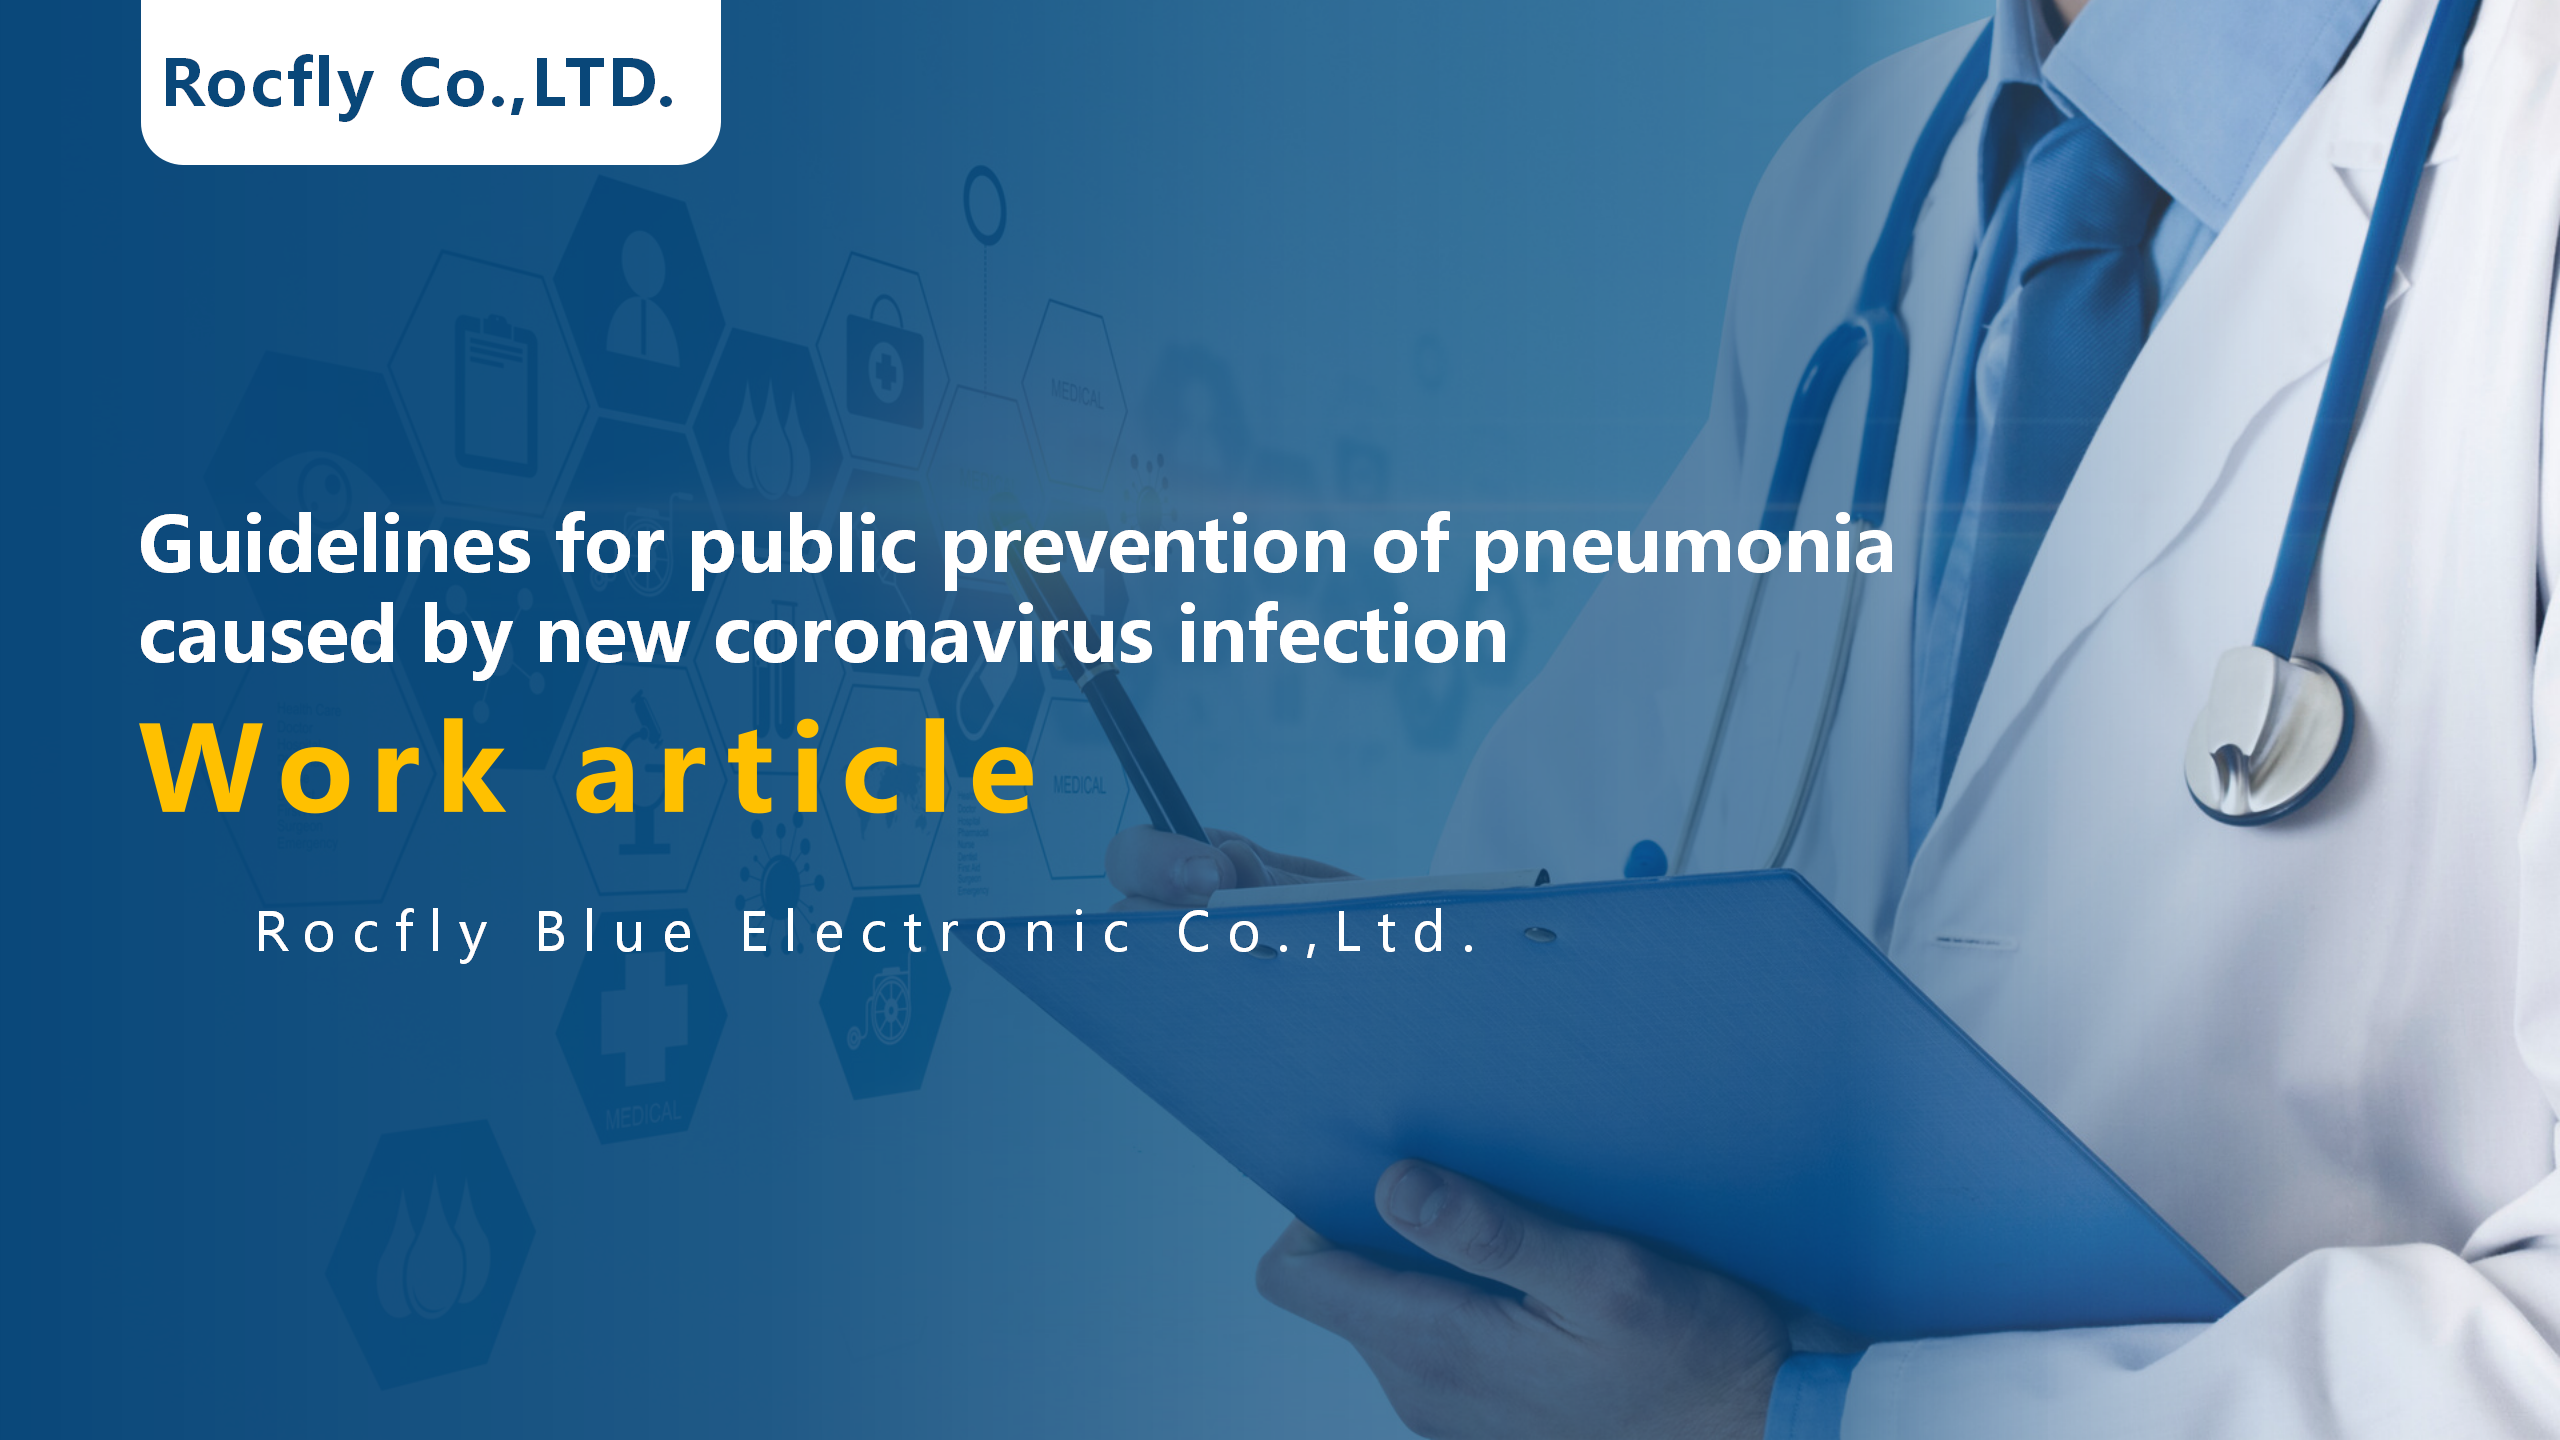 Guidelines for public prevention of pneumonia caused by new coronavirus infection